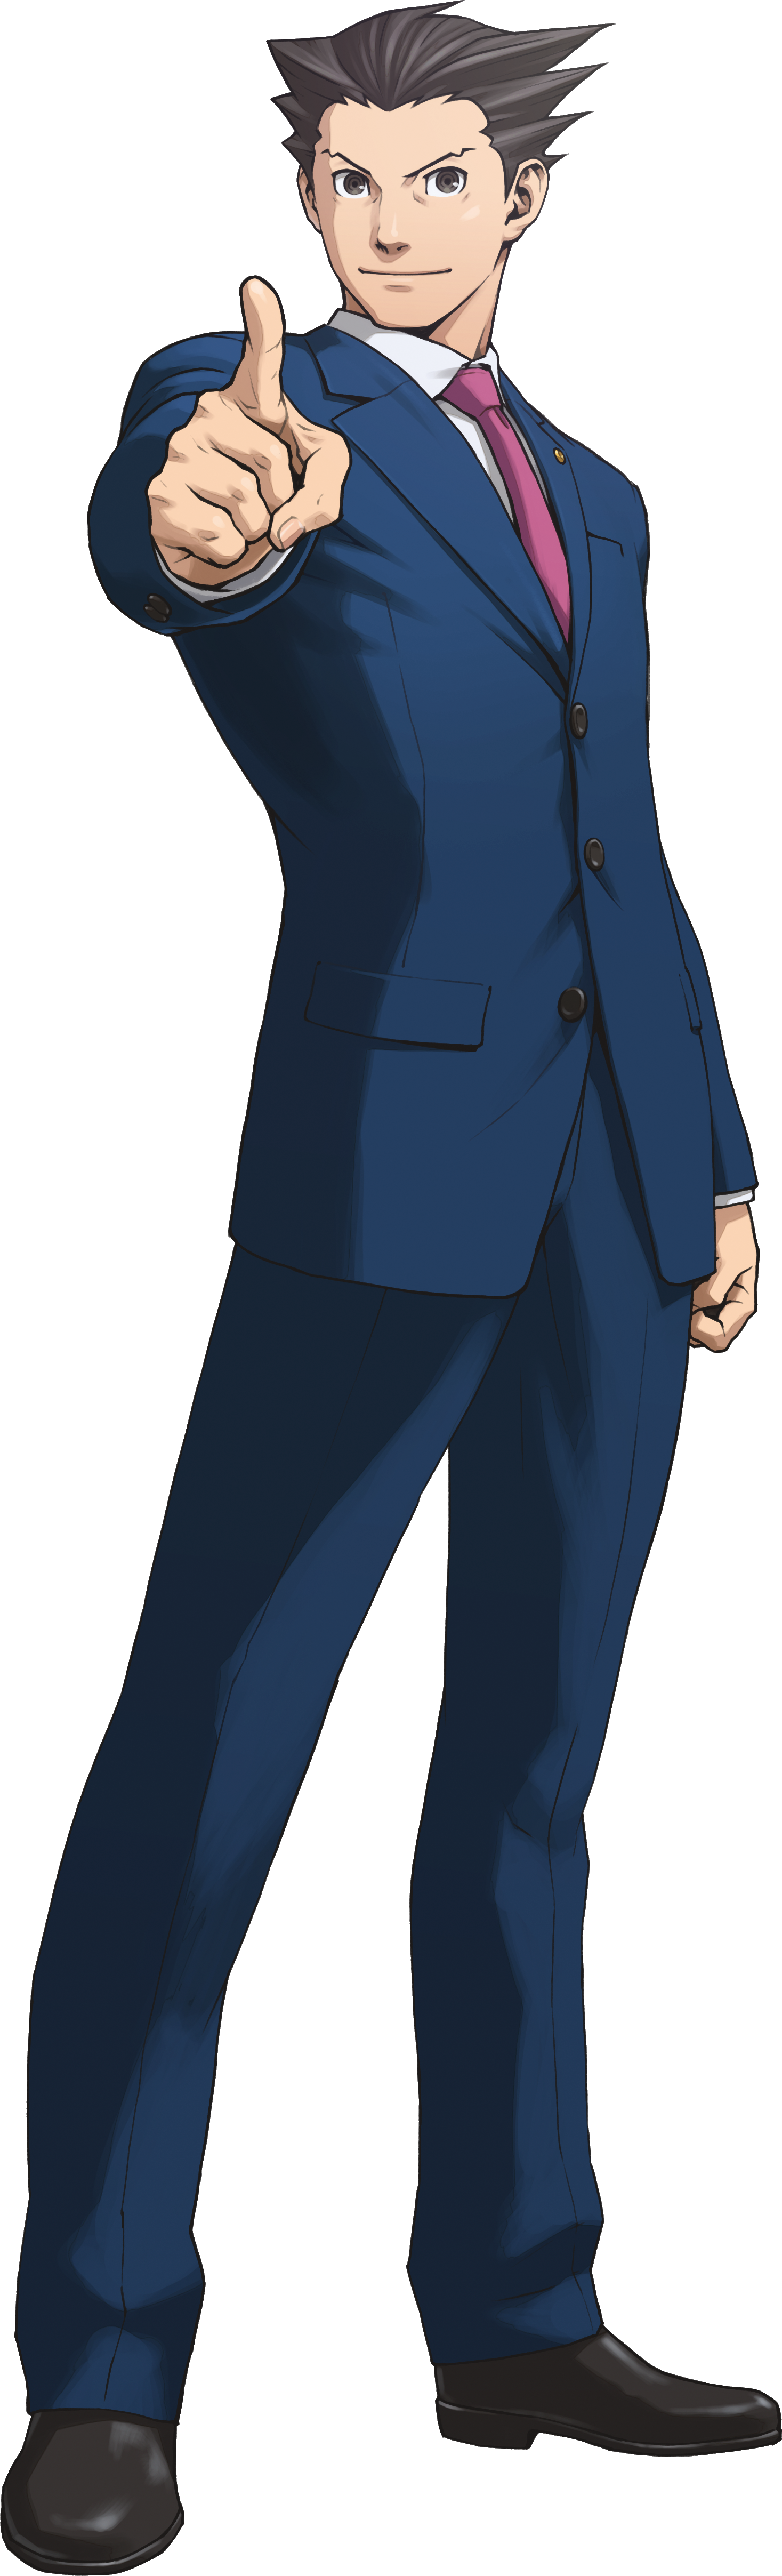 Ace Attorney PNG Image in Transparent - Ace Attorney Png